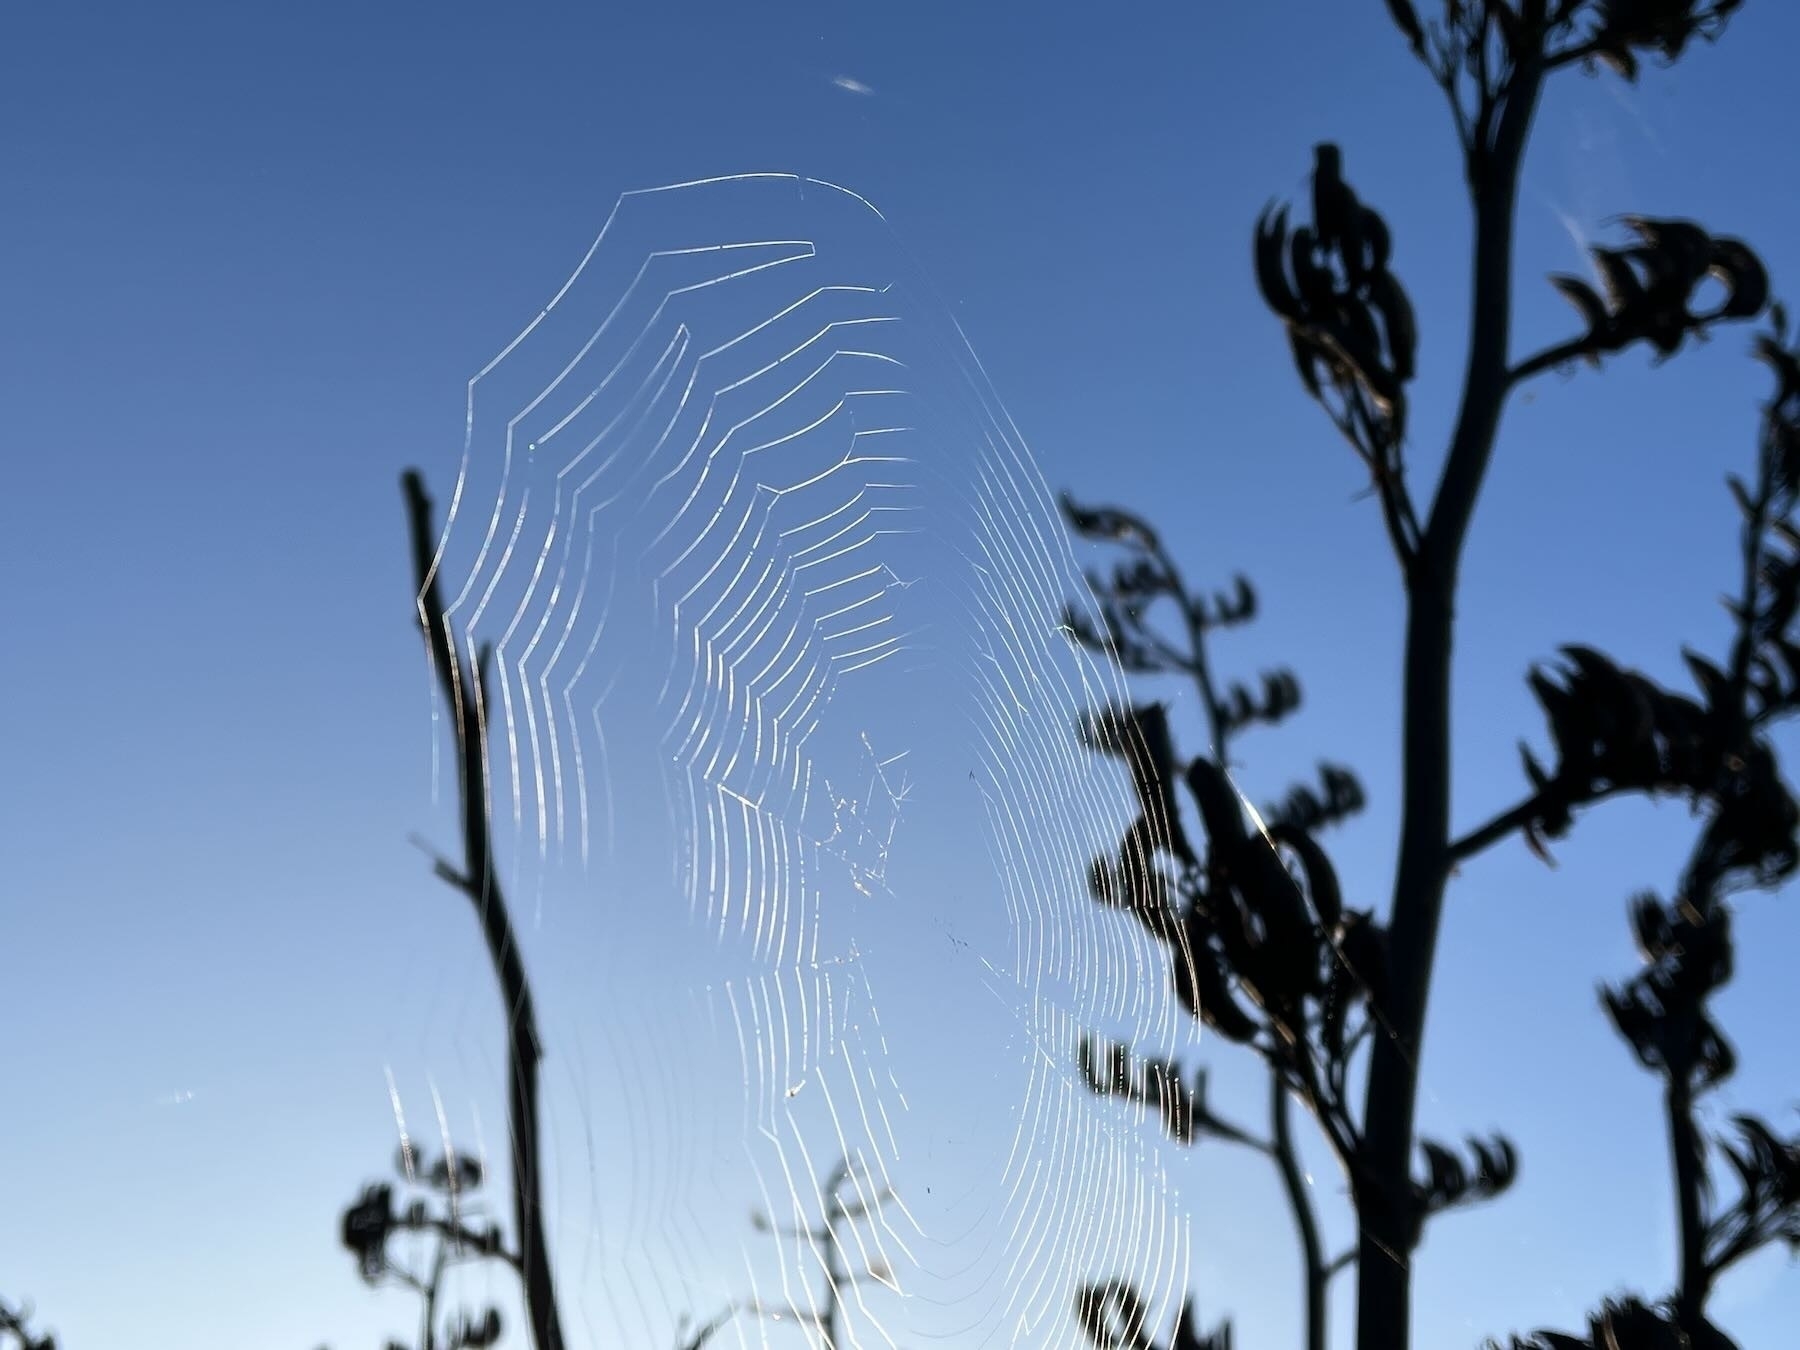 Cobweb stretched between two flax spears, sunlight on it, deep blue sky behind.